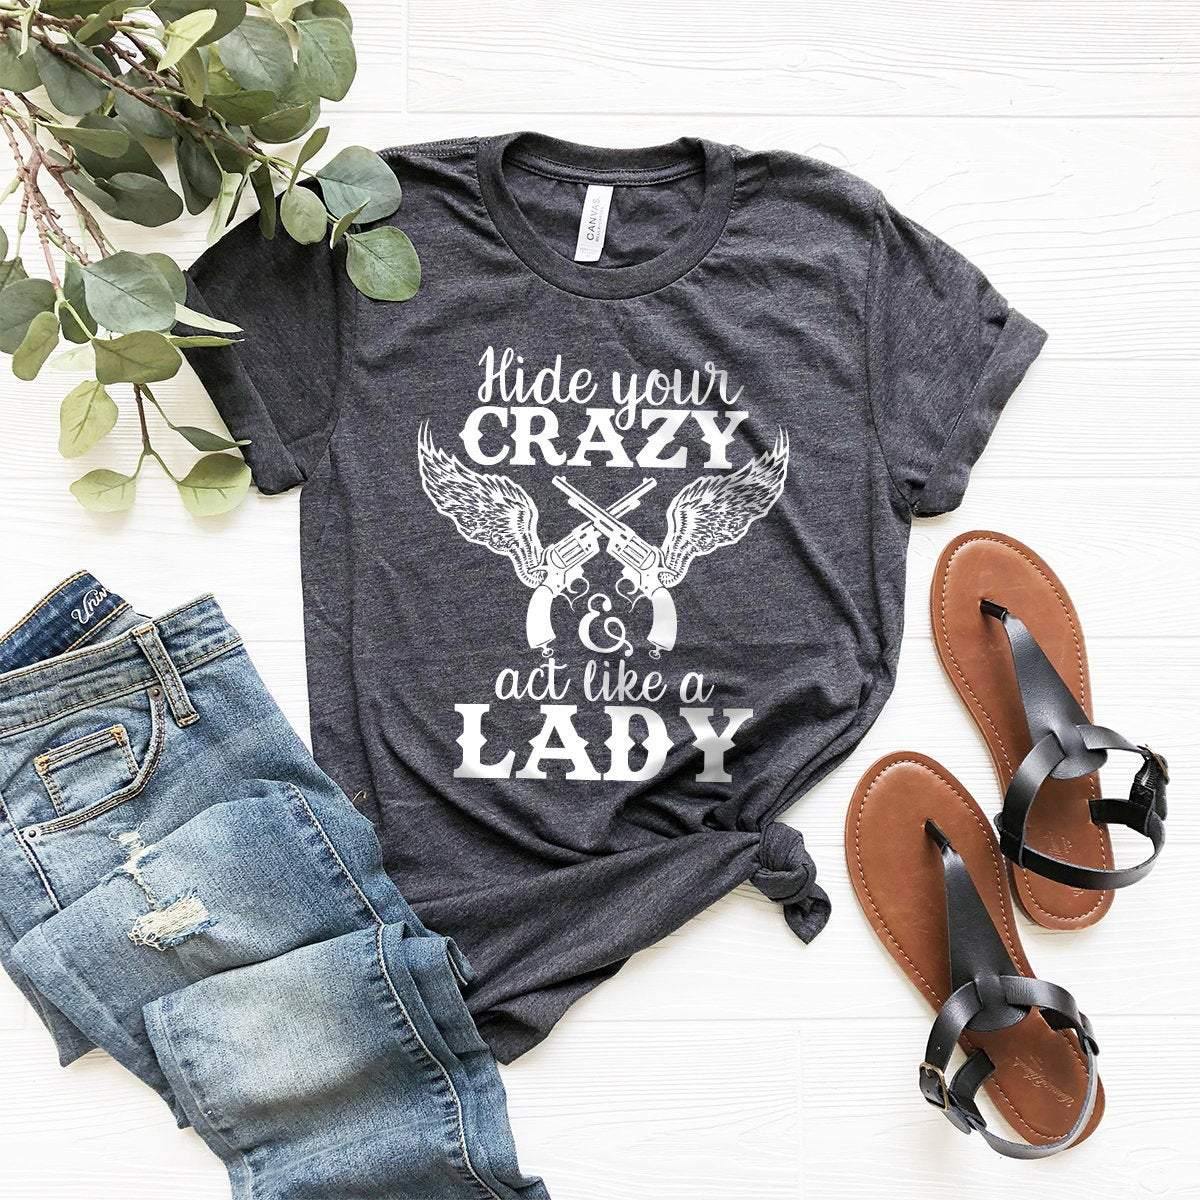 Country Girl Shirt, Country Music Shirt, Western Girl Shirt, Southern Girl Shirt, Country Shirt, Hide Your Crazy Act Like A Lady Shirt - Fastdeliverytees.com